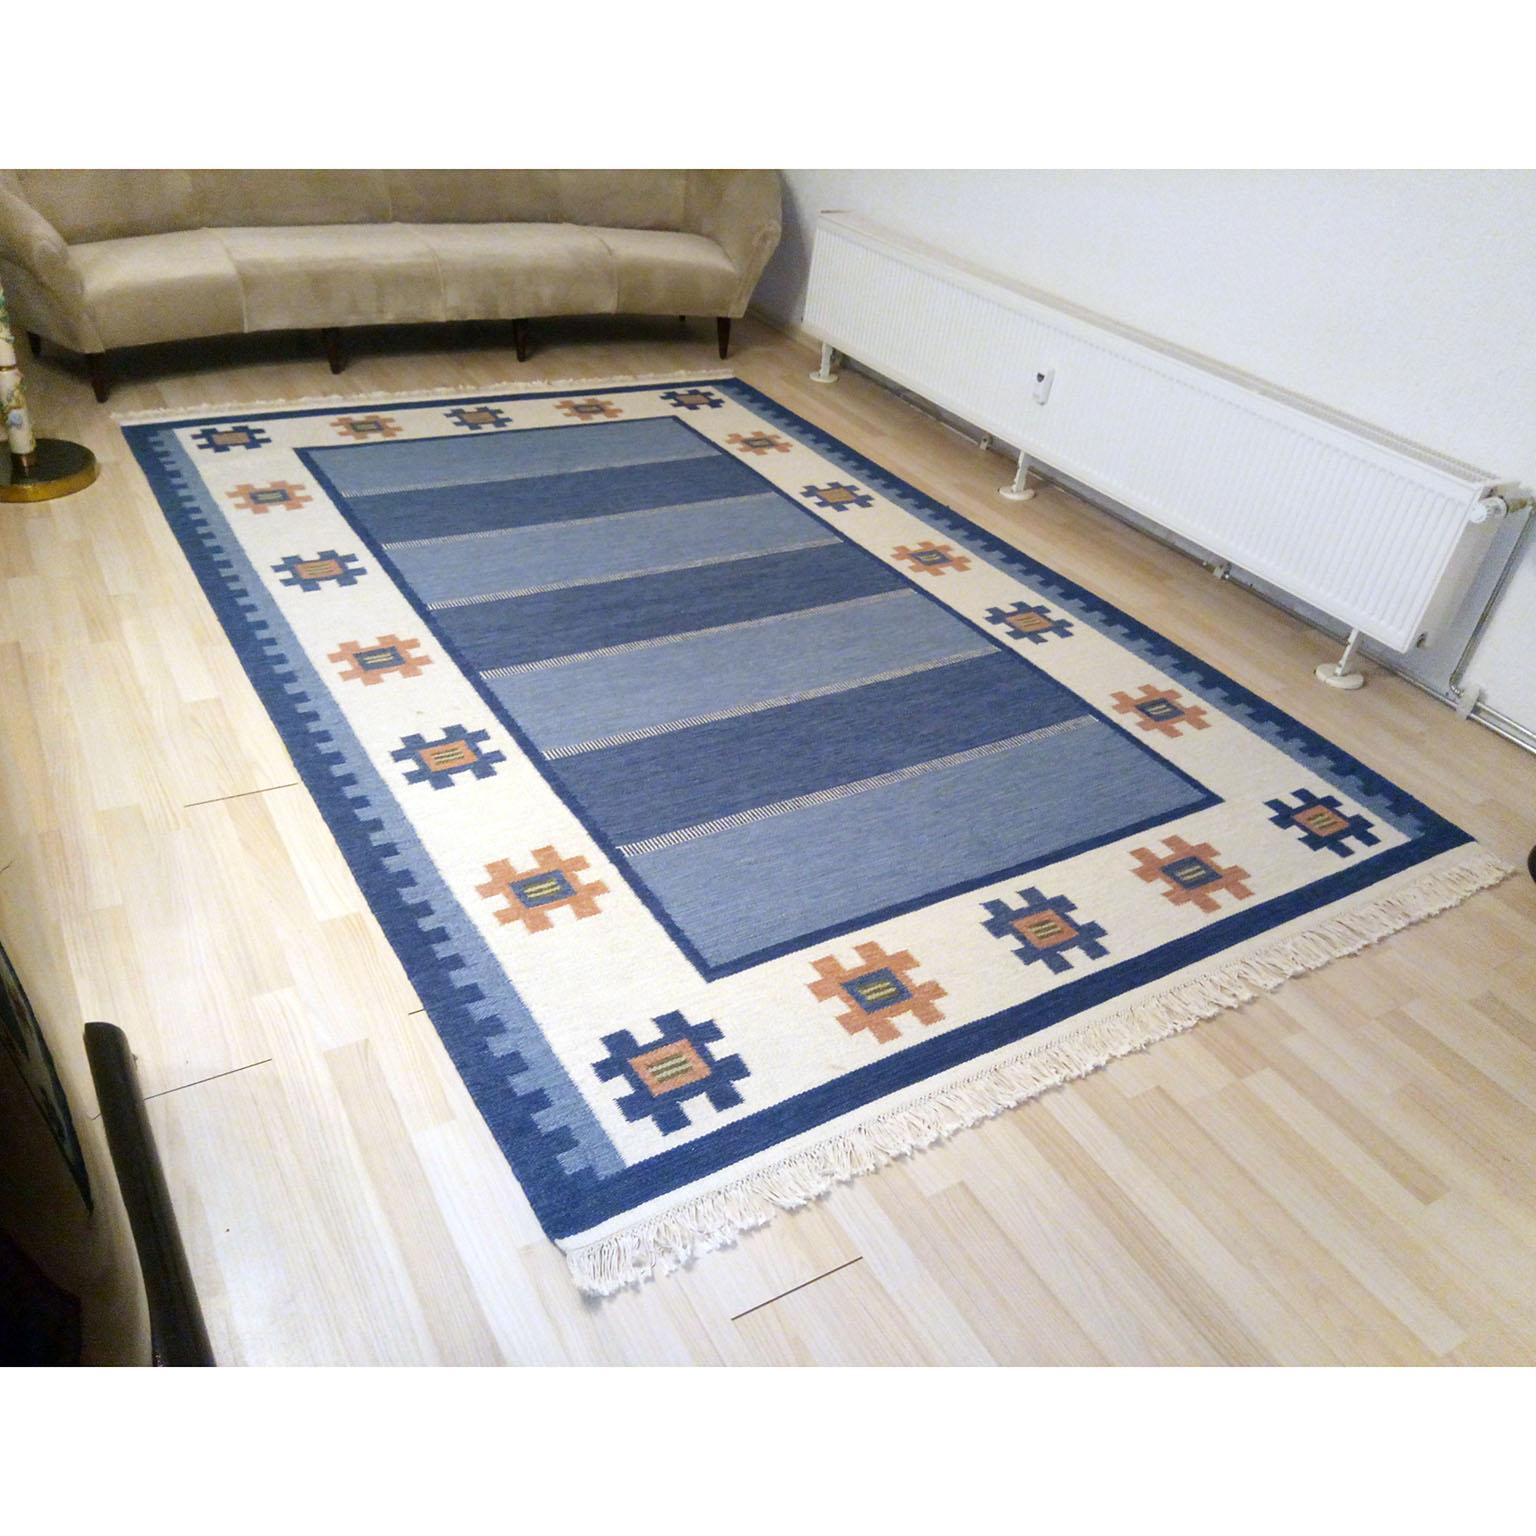 A Mid-Century Modern Swedish Rolakan Kilim, flat-weave Kilim rug, in faded nuances of blue and beige, after a design of Ellen Stahlbrand. This flat-weave carpet features a geometric modern Scandinavian pattern. This midcentury Swedish Rolakan was